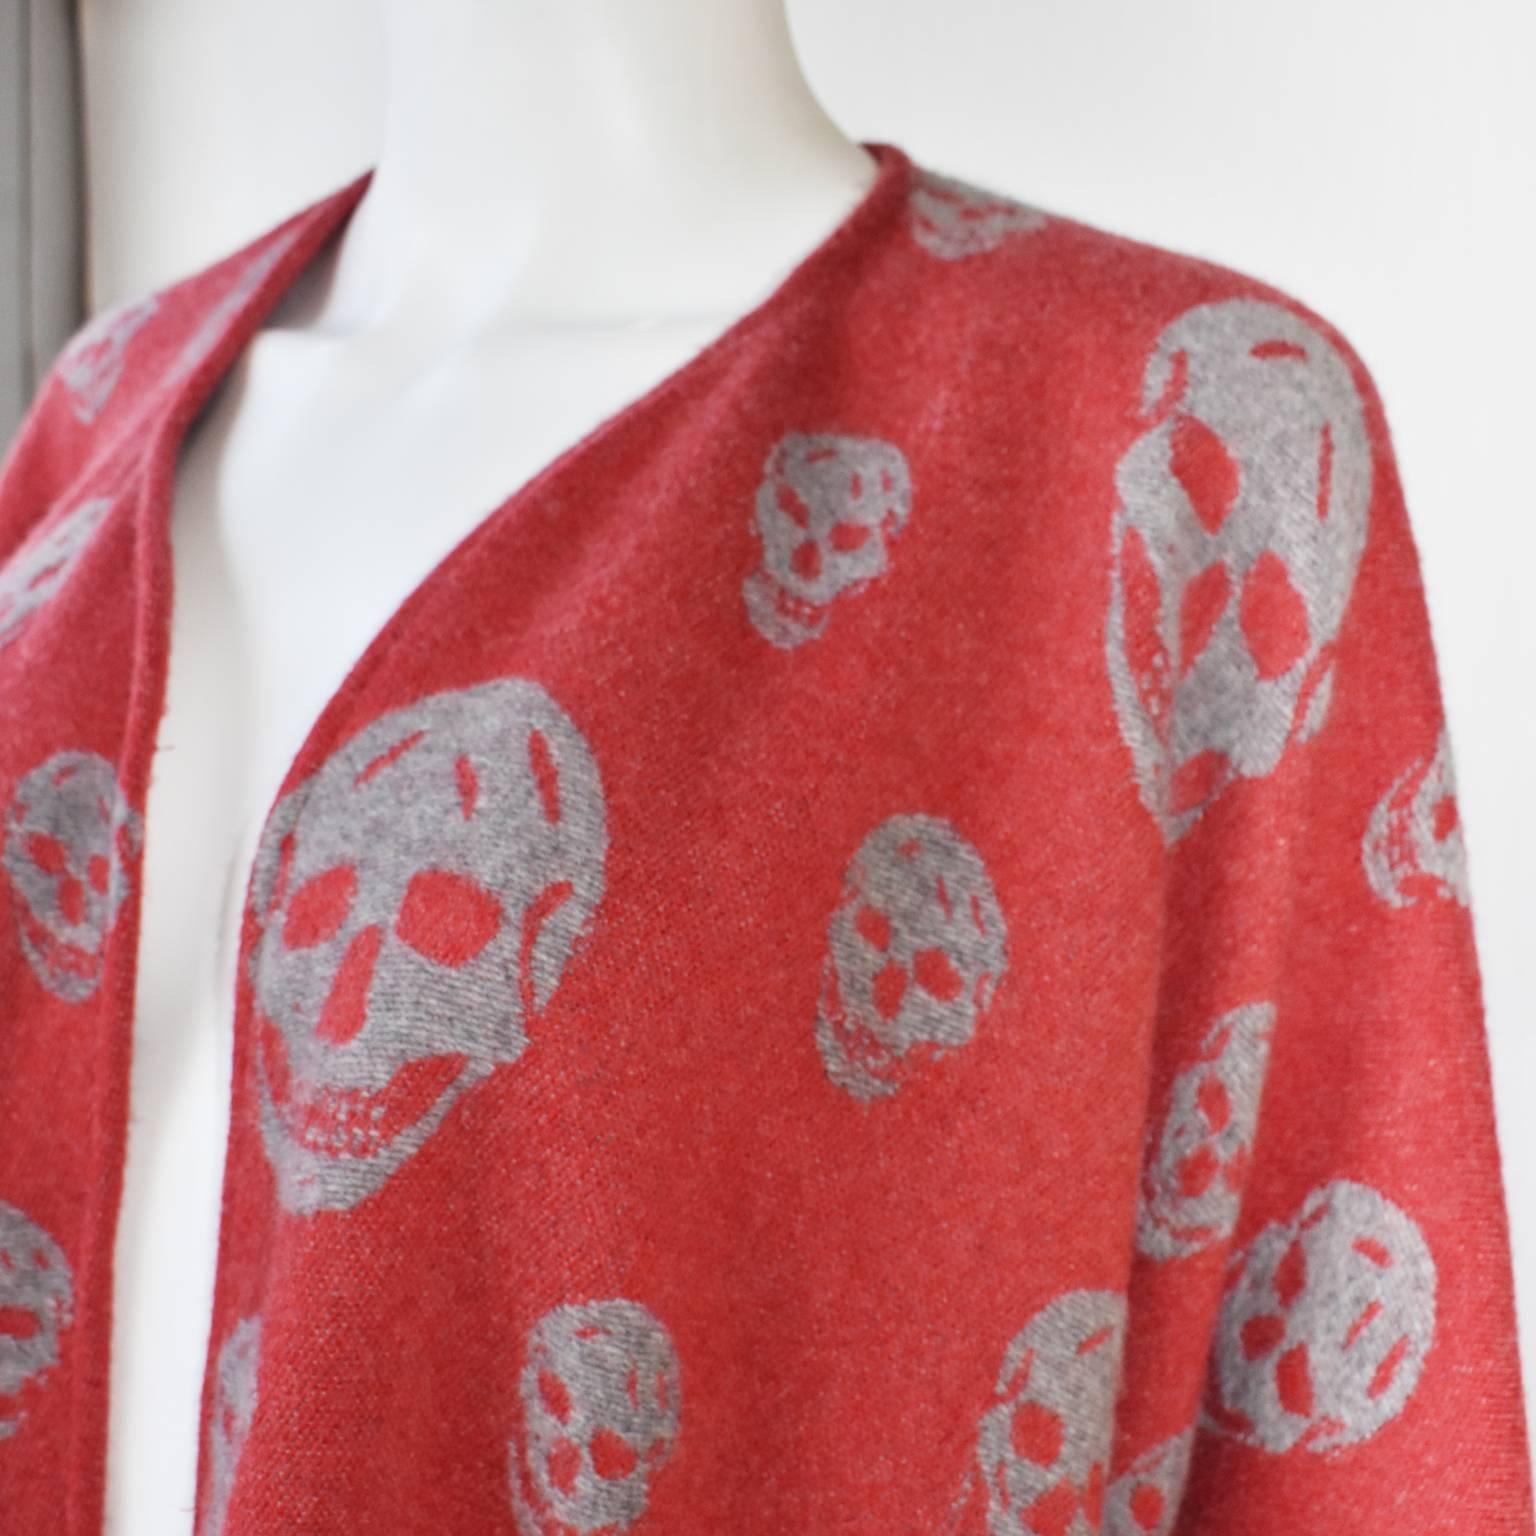 A red cape with fringes and grey skull motifs by Alexander McQueen. The item is brand new. It has no fastening and can be styled in a variety of ways. Free size.
